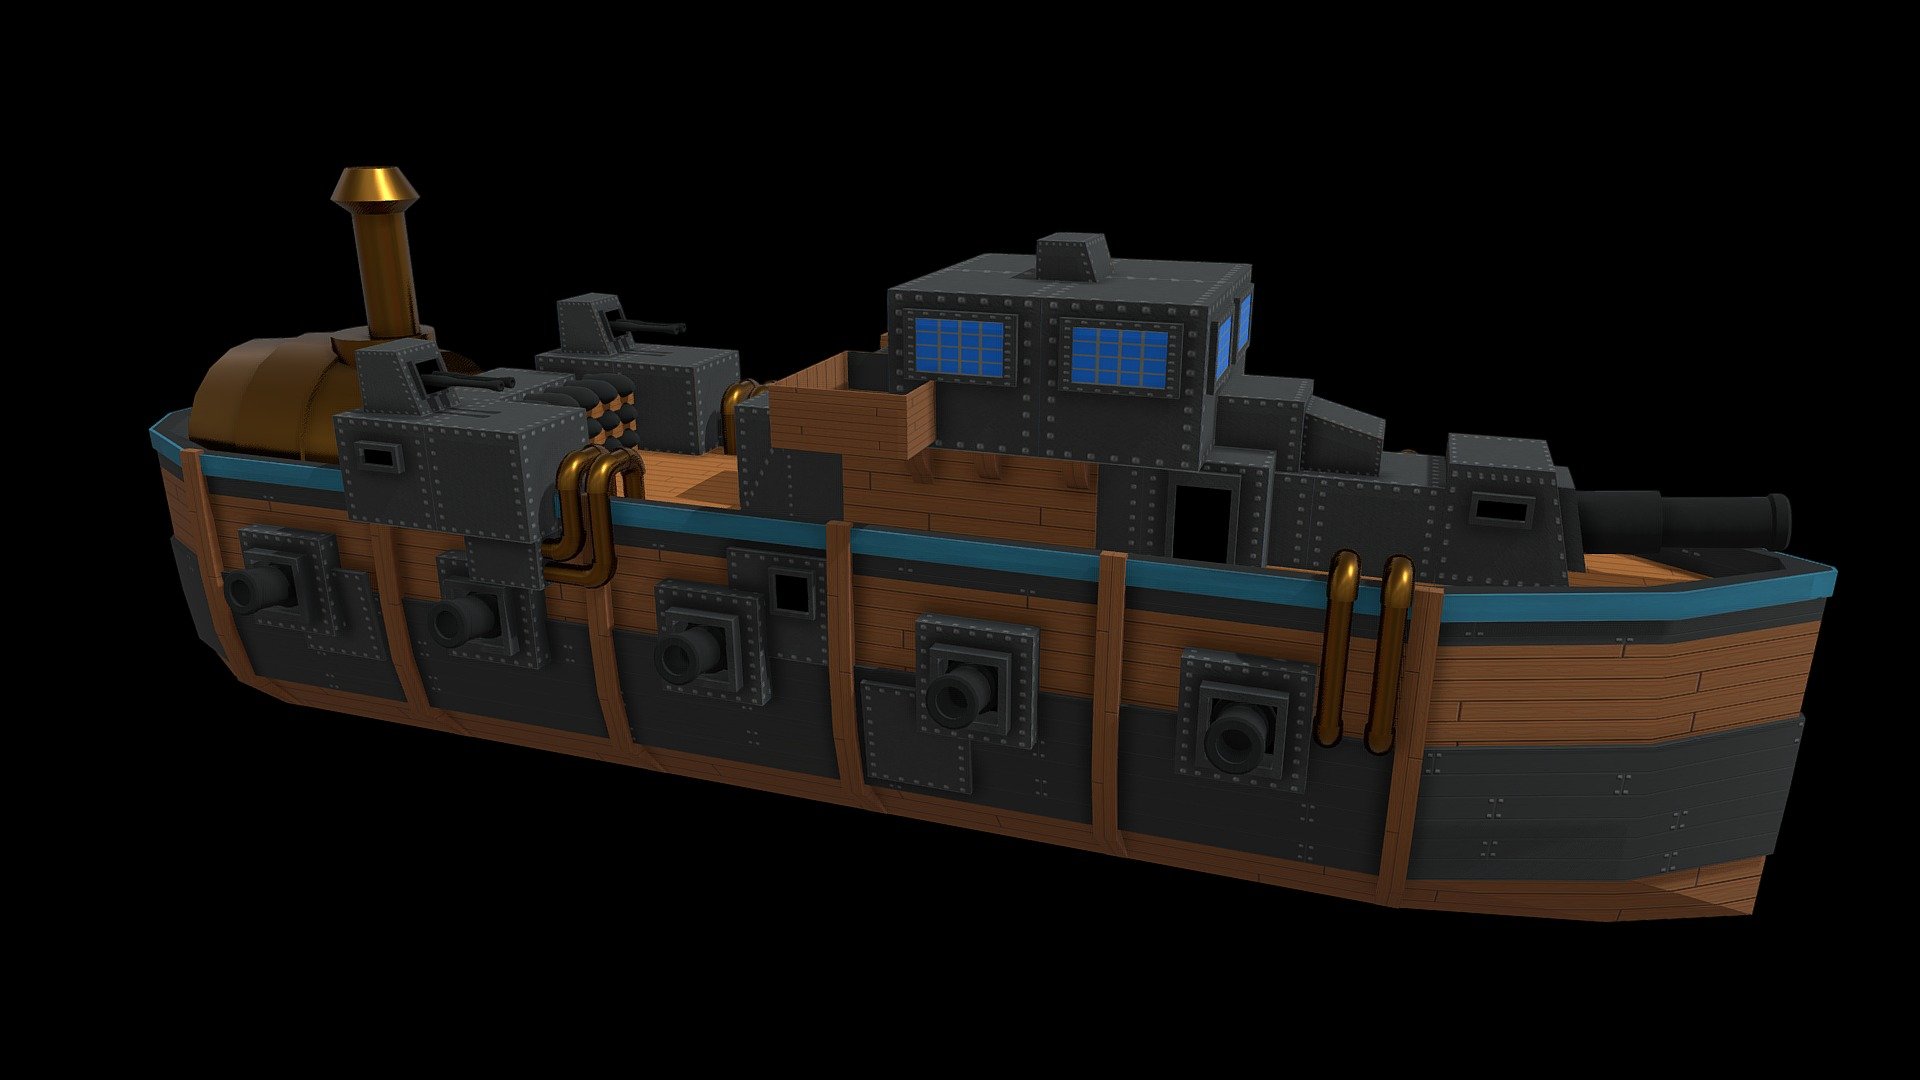 pre-1900s stylized war ship

-war ship with 5 large broadside cannons on each side. 1 forward cannon and 2 gun turrets

-this is part of a collection of ships https://skfb.ly/oHOAO - Broadsider war ship - Buy Royalty Free 3D model by Randall_3D 3d model